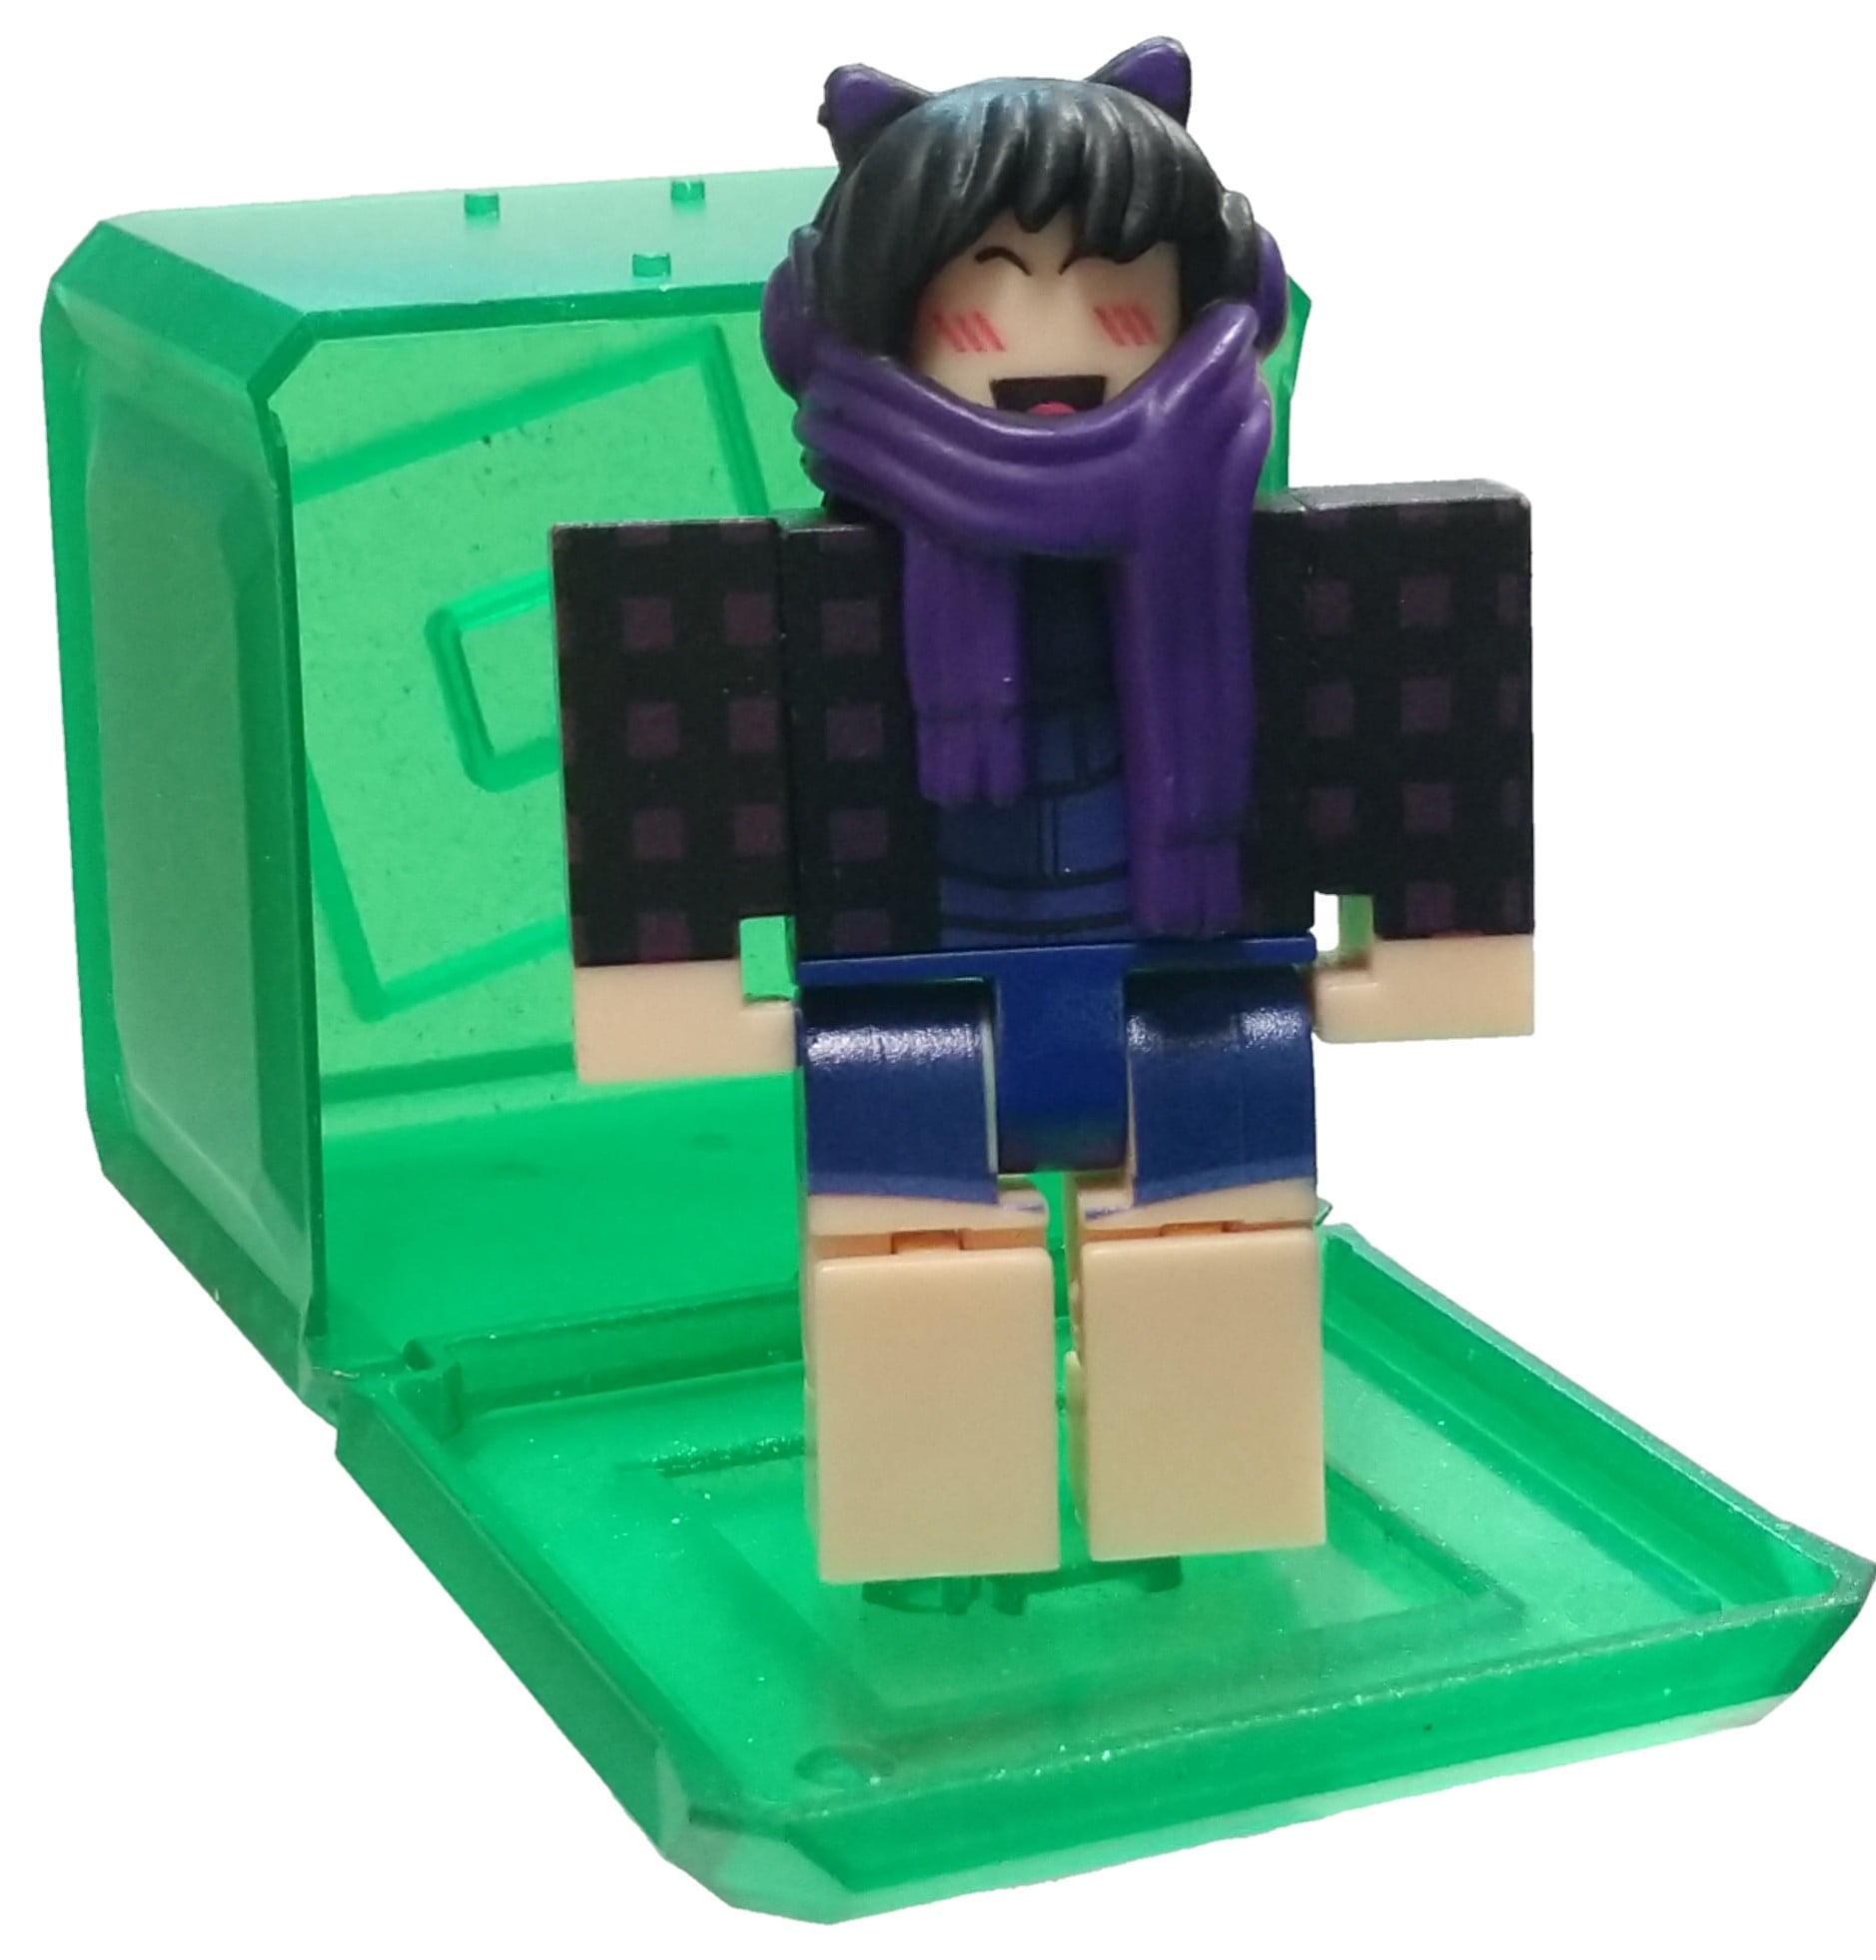 Roblox Celebrity Collection Series 4 Evaera Mini Figure With Green Cube And Online Code No Packaging Walmart Com Walmart Com - roblox celebrity collection series 4